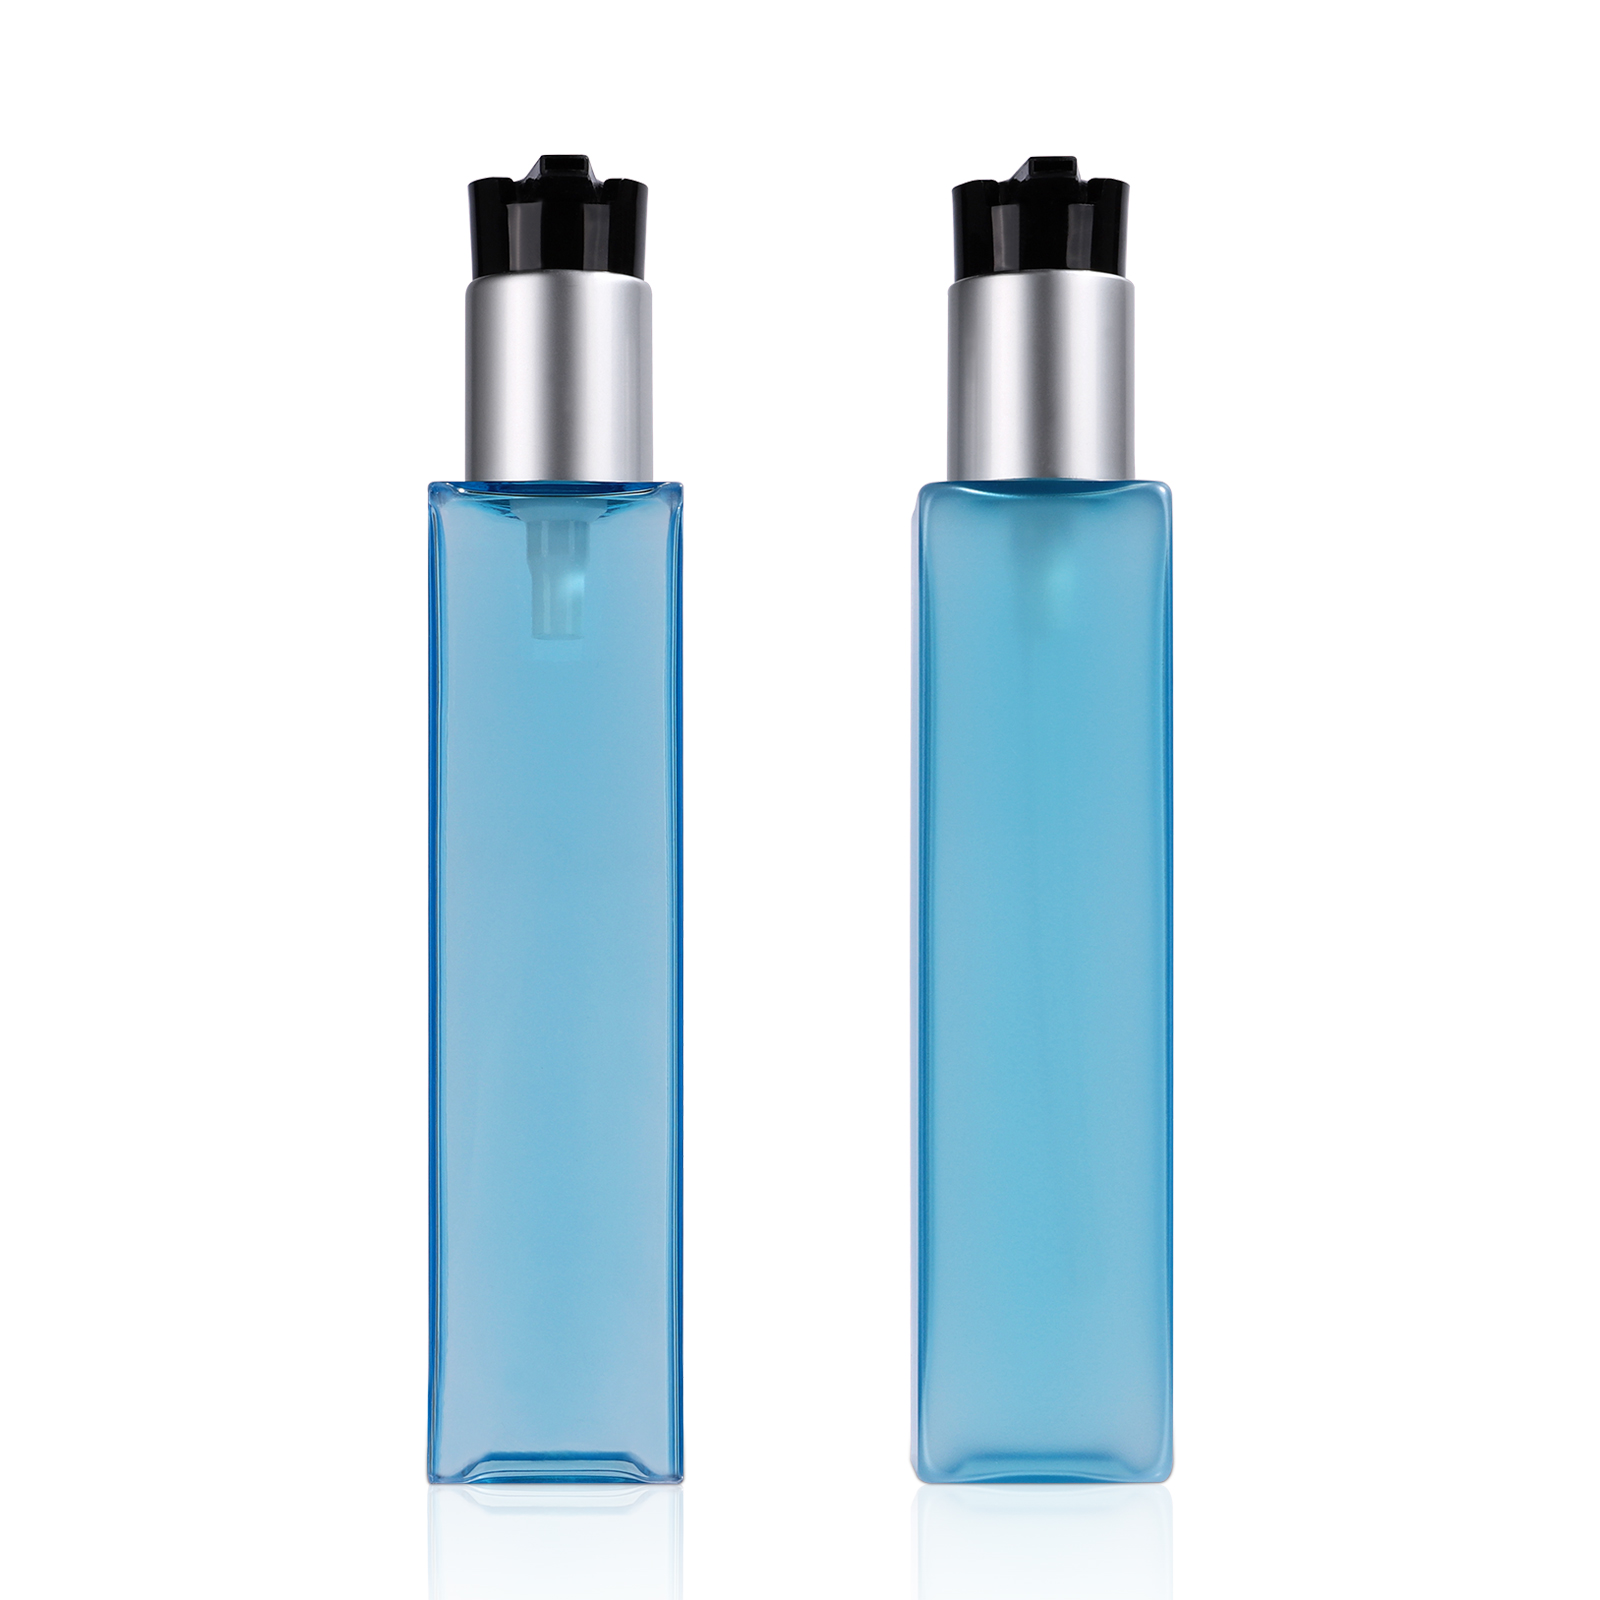 China factory manufacturer 190ml empty square shaped different semi-transparent colors PET plastic bottle, with lotion pump/ spray pump or screw cap/ flip lid cap with sealing plug